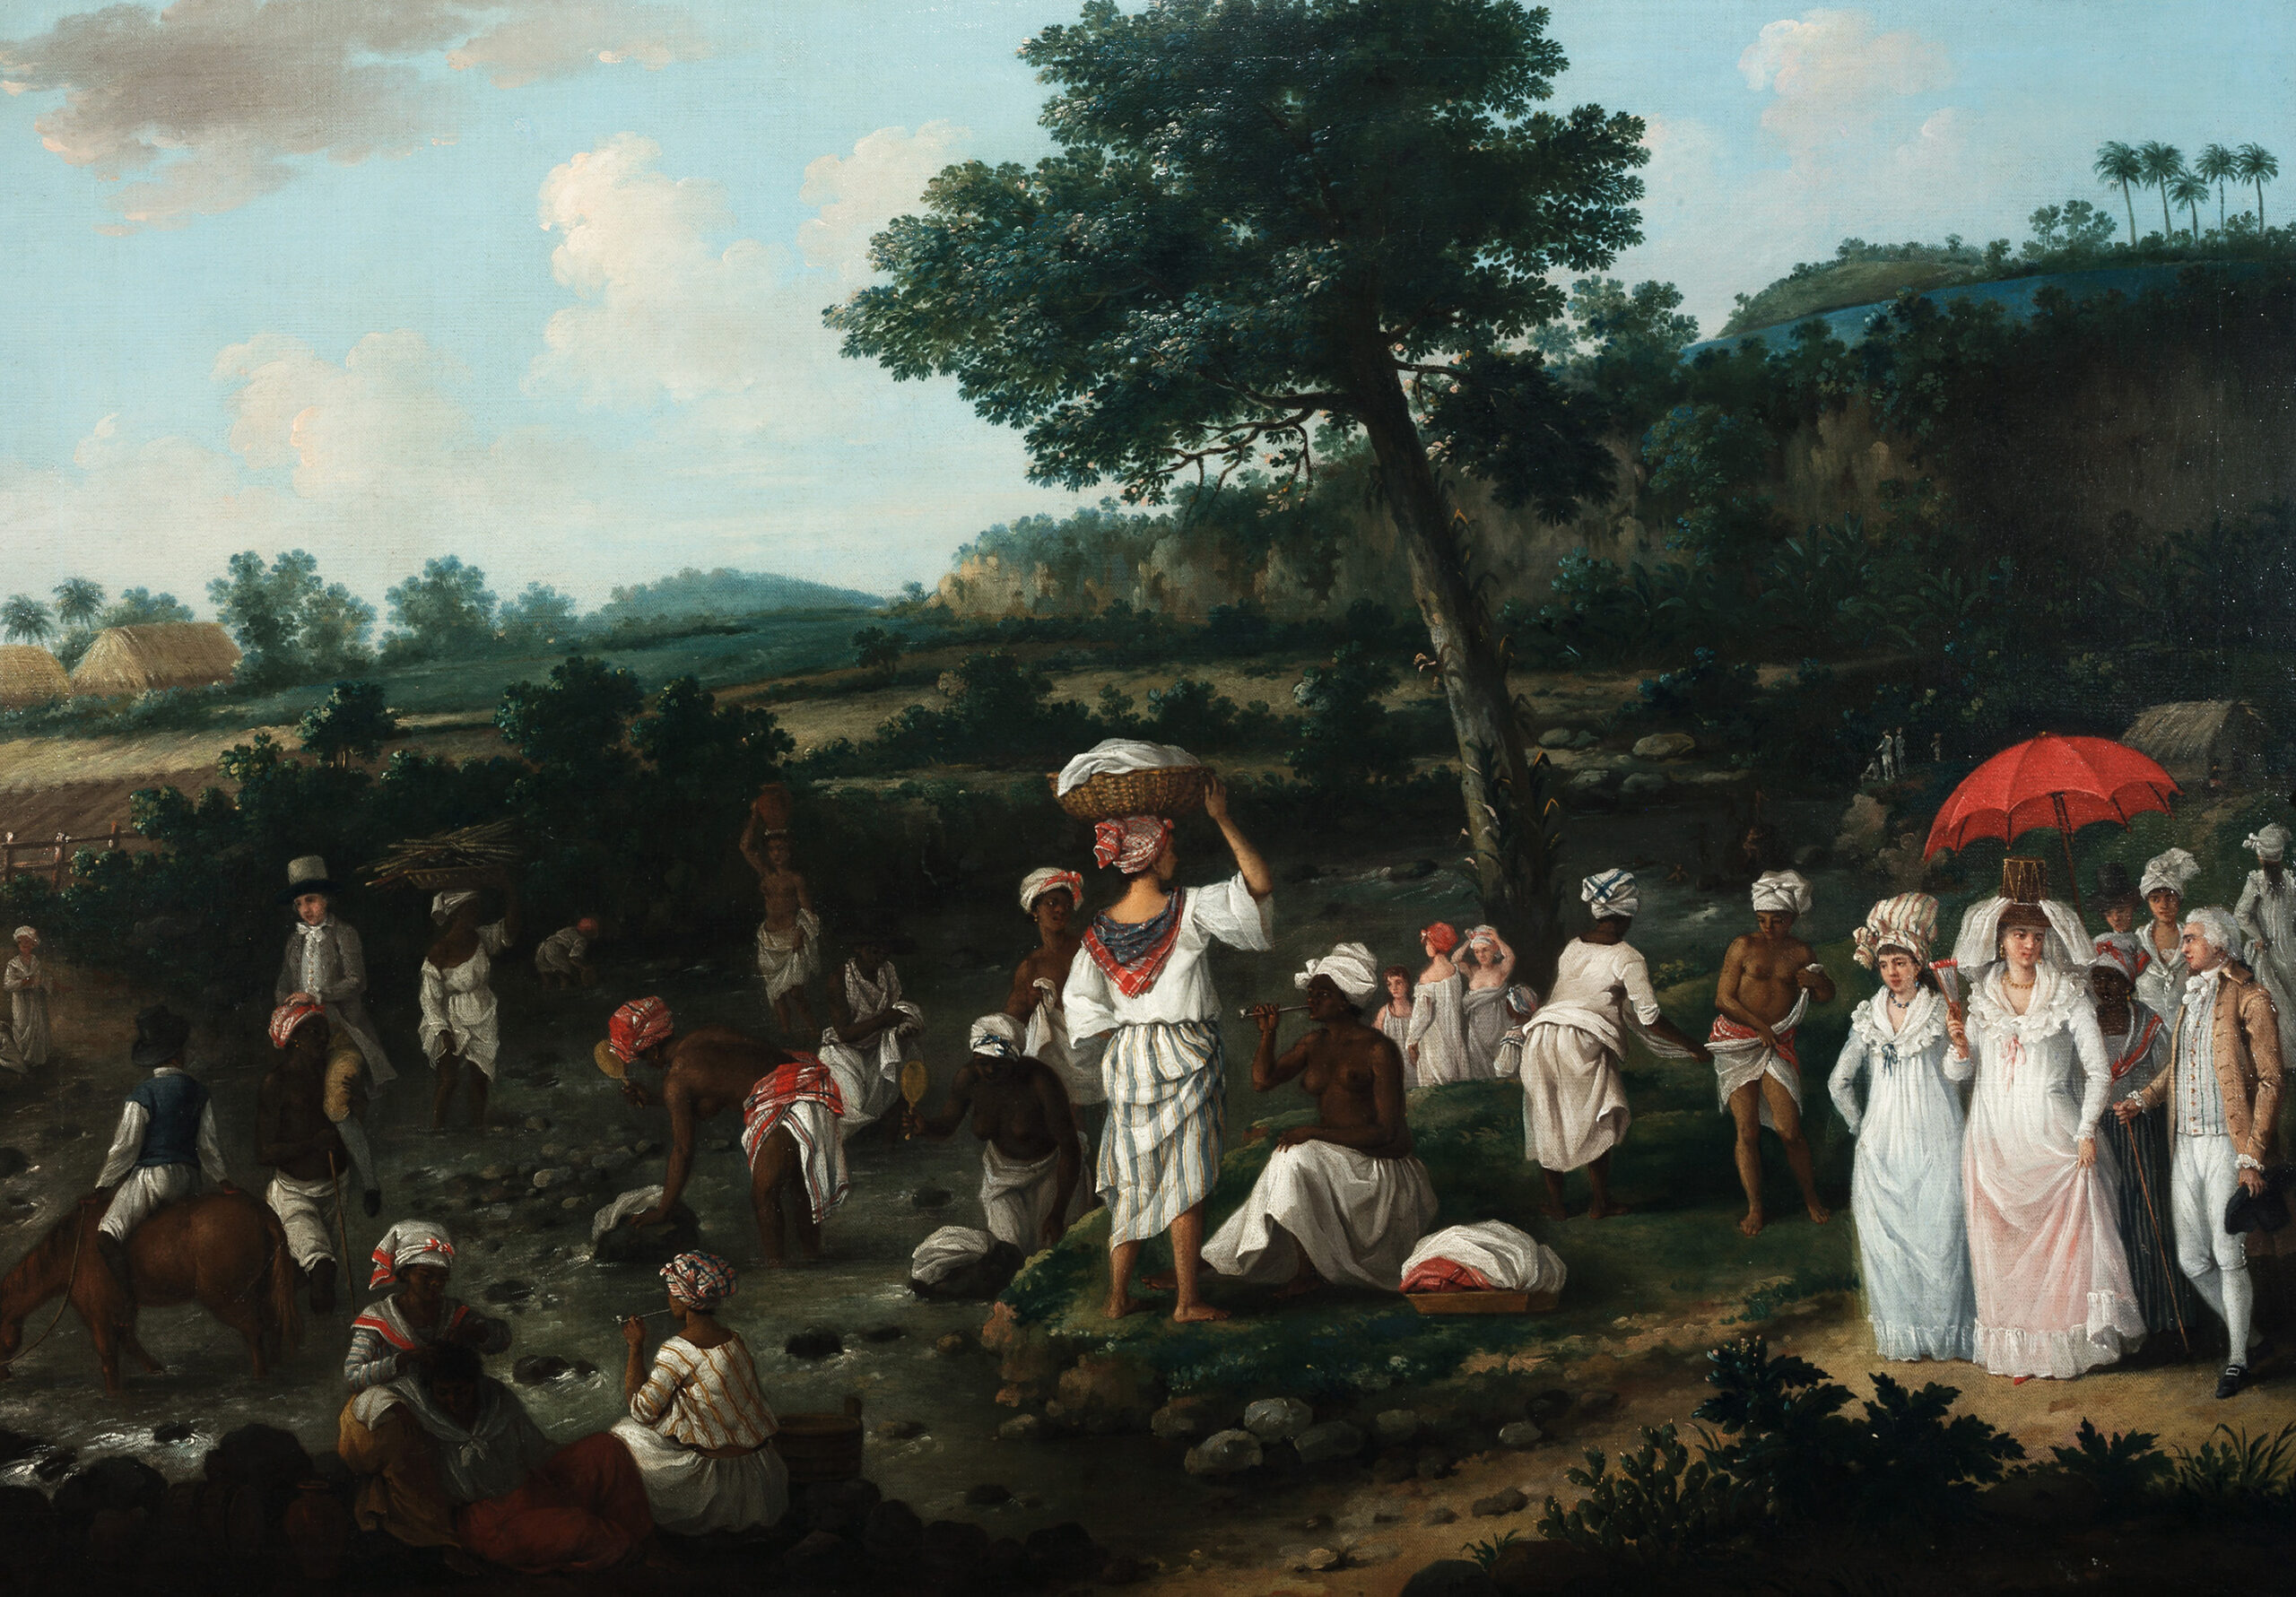 A landscape painting with white European and Black Caribbean people, a blue sky with white clouds, green trees, and a rocky ground.